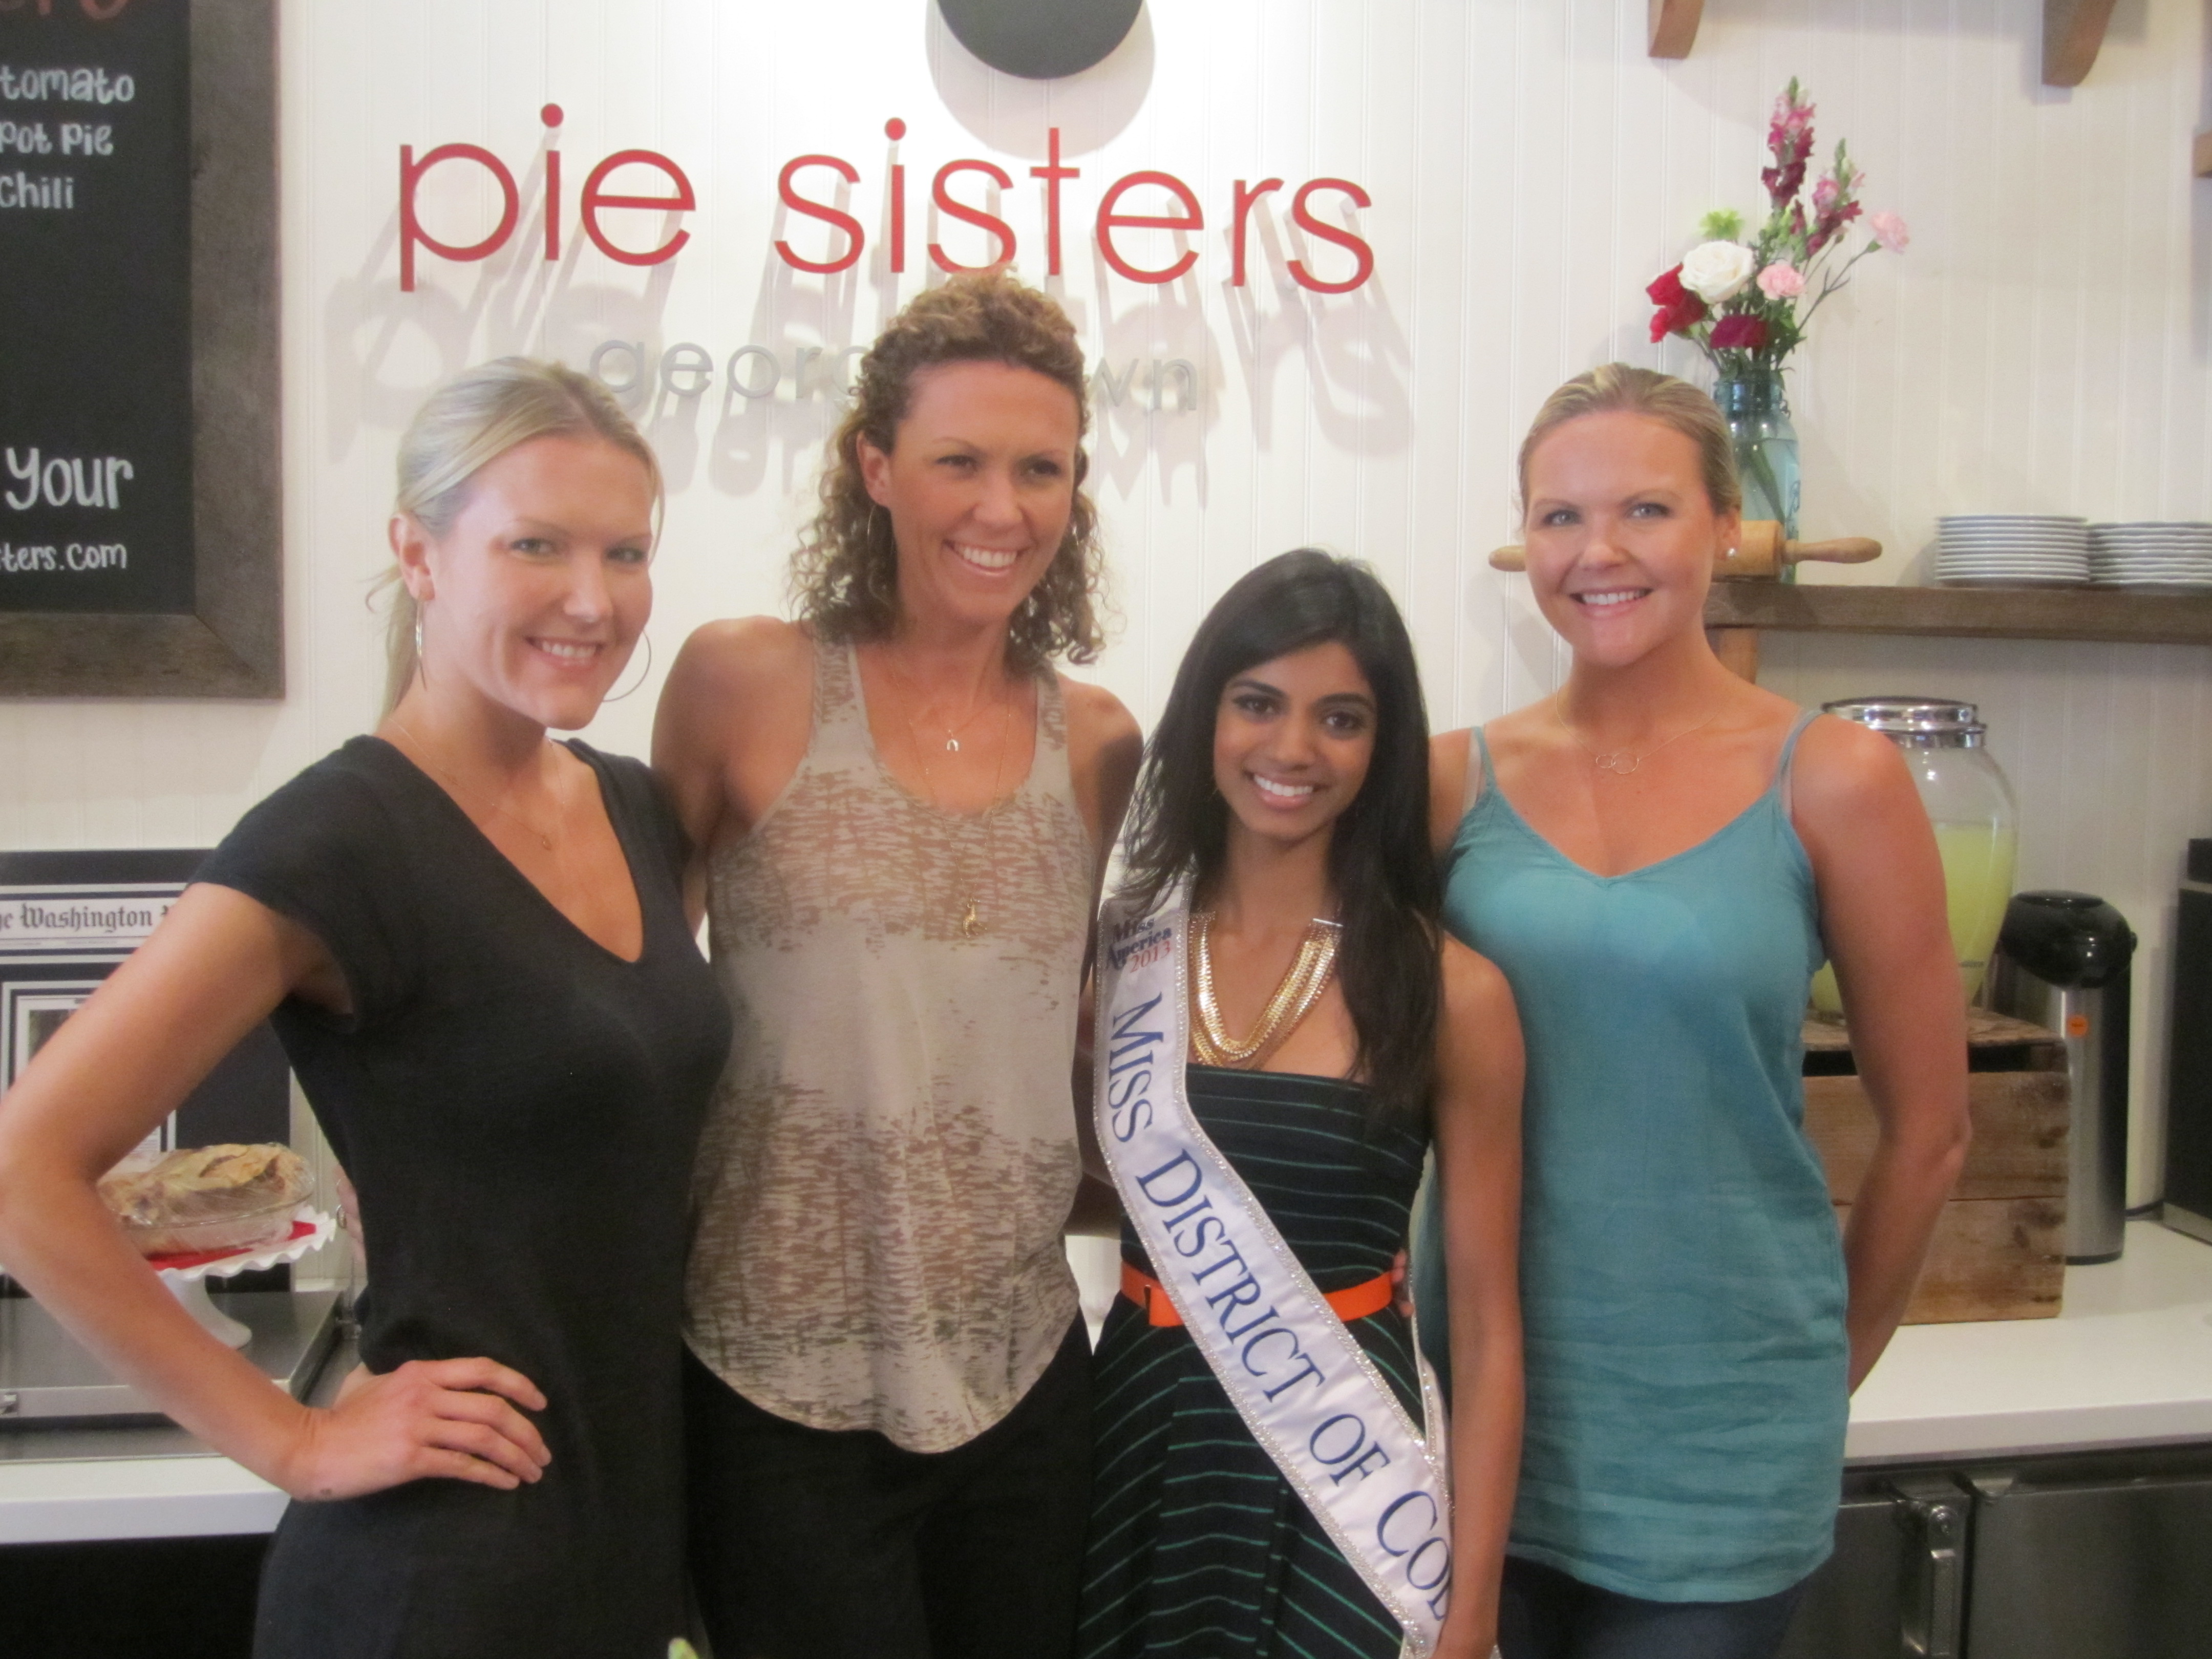 Spotted: Pageant Queens Eating Pie!